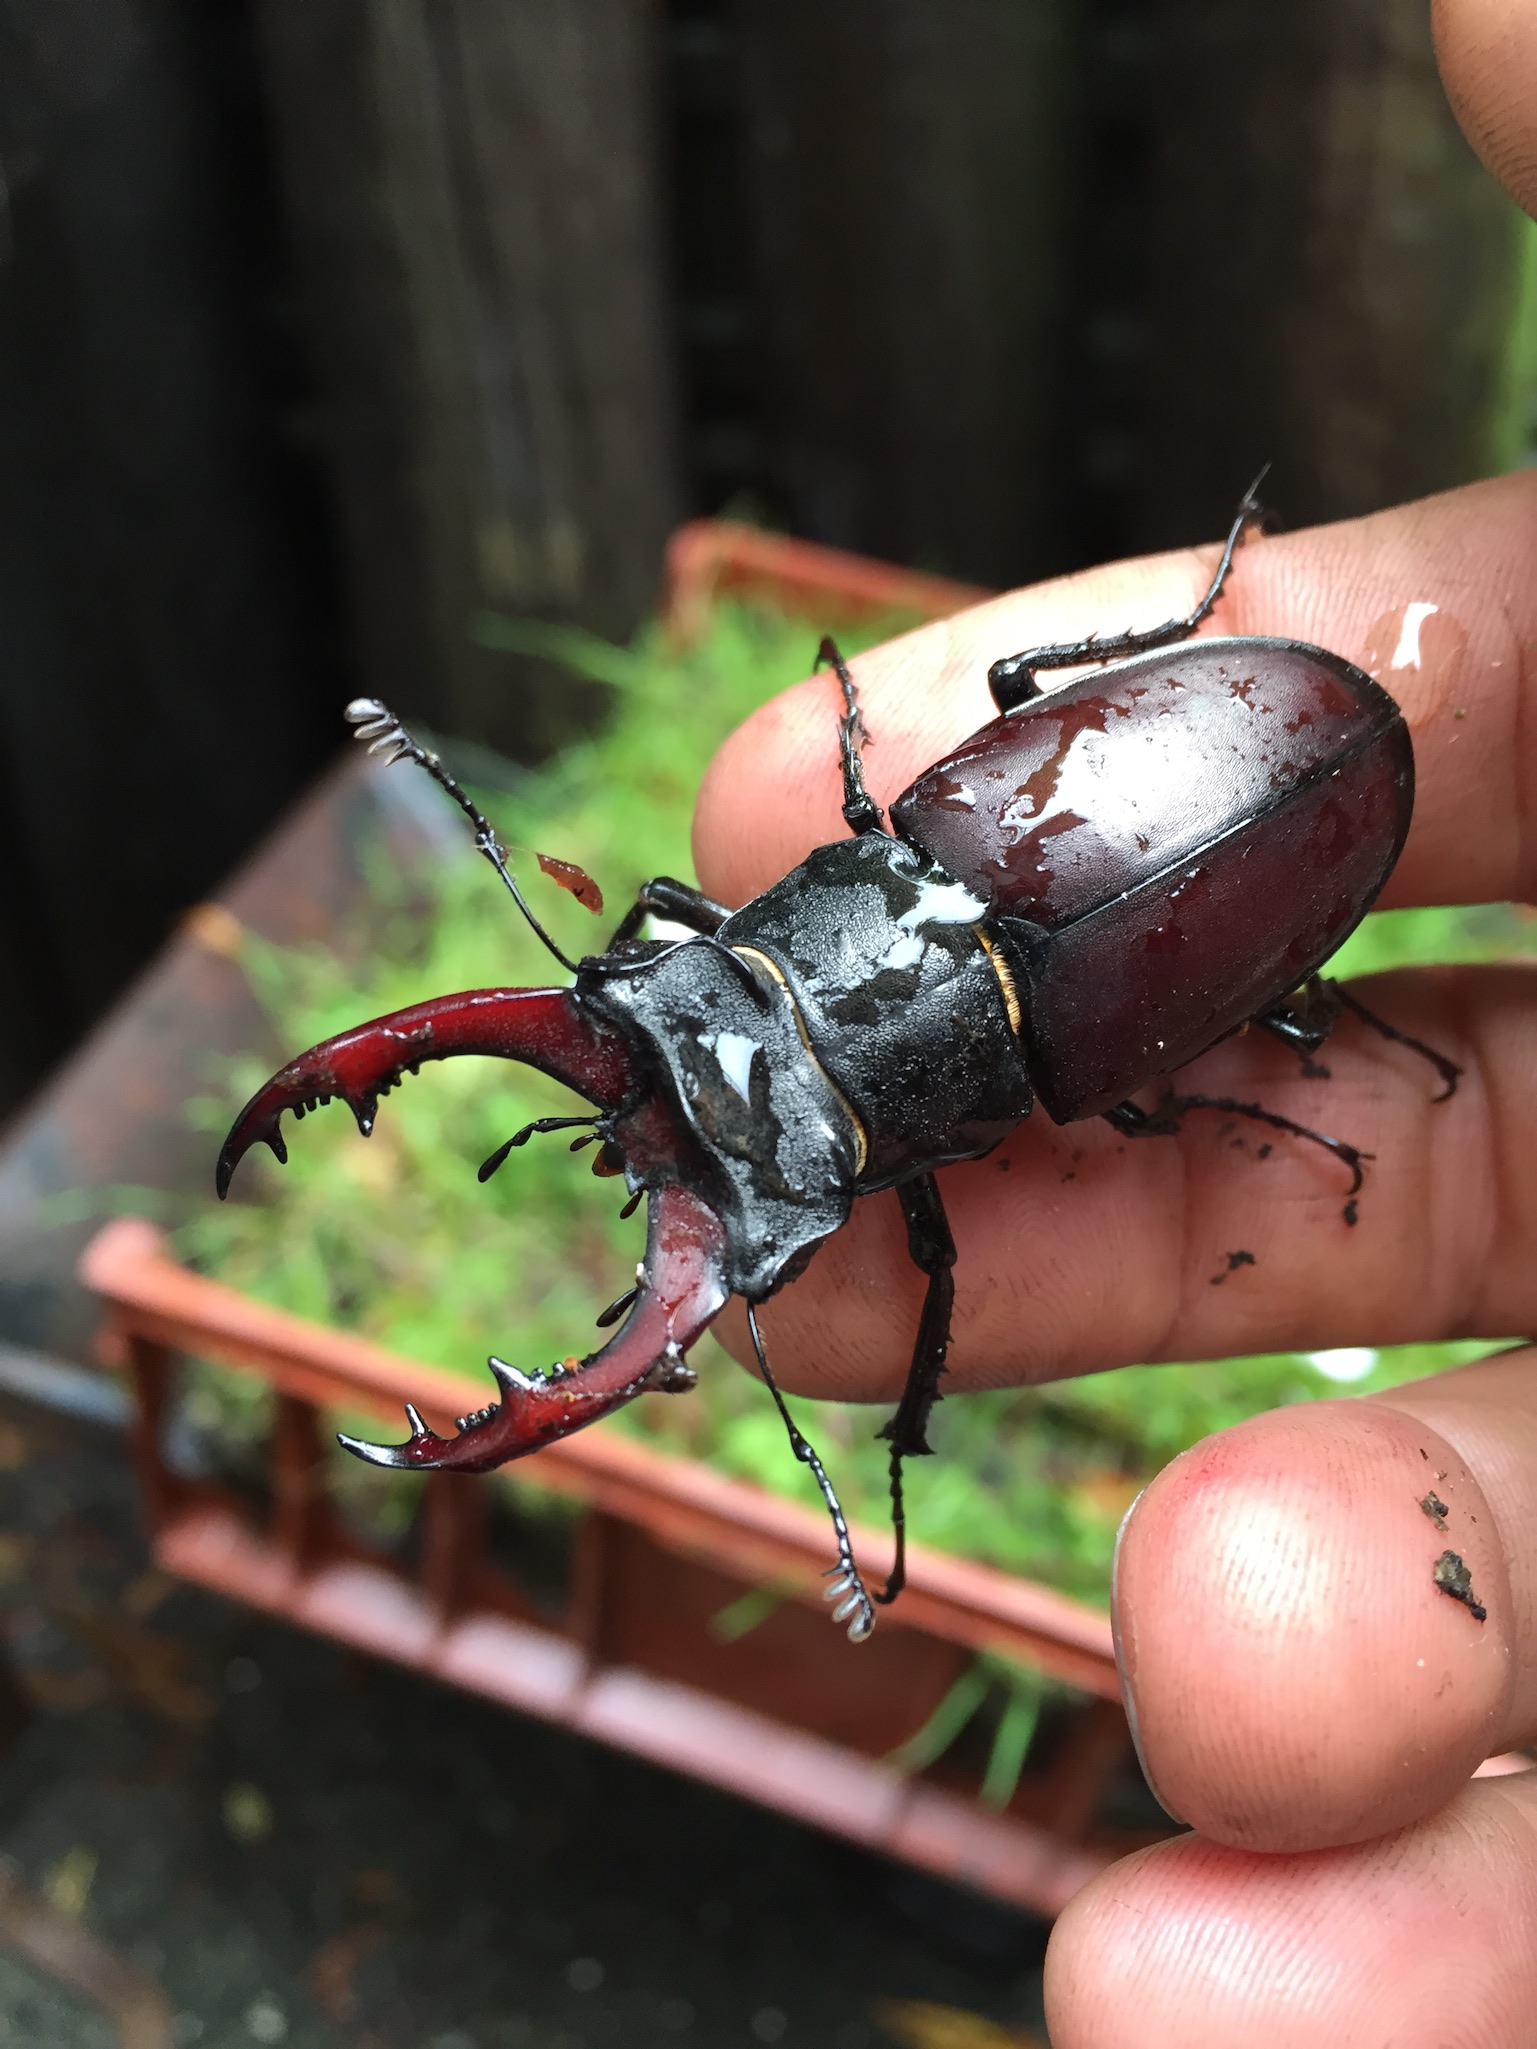 Colour variants of a Male Stag Beetle